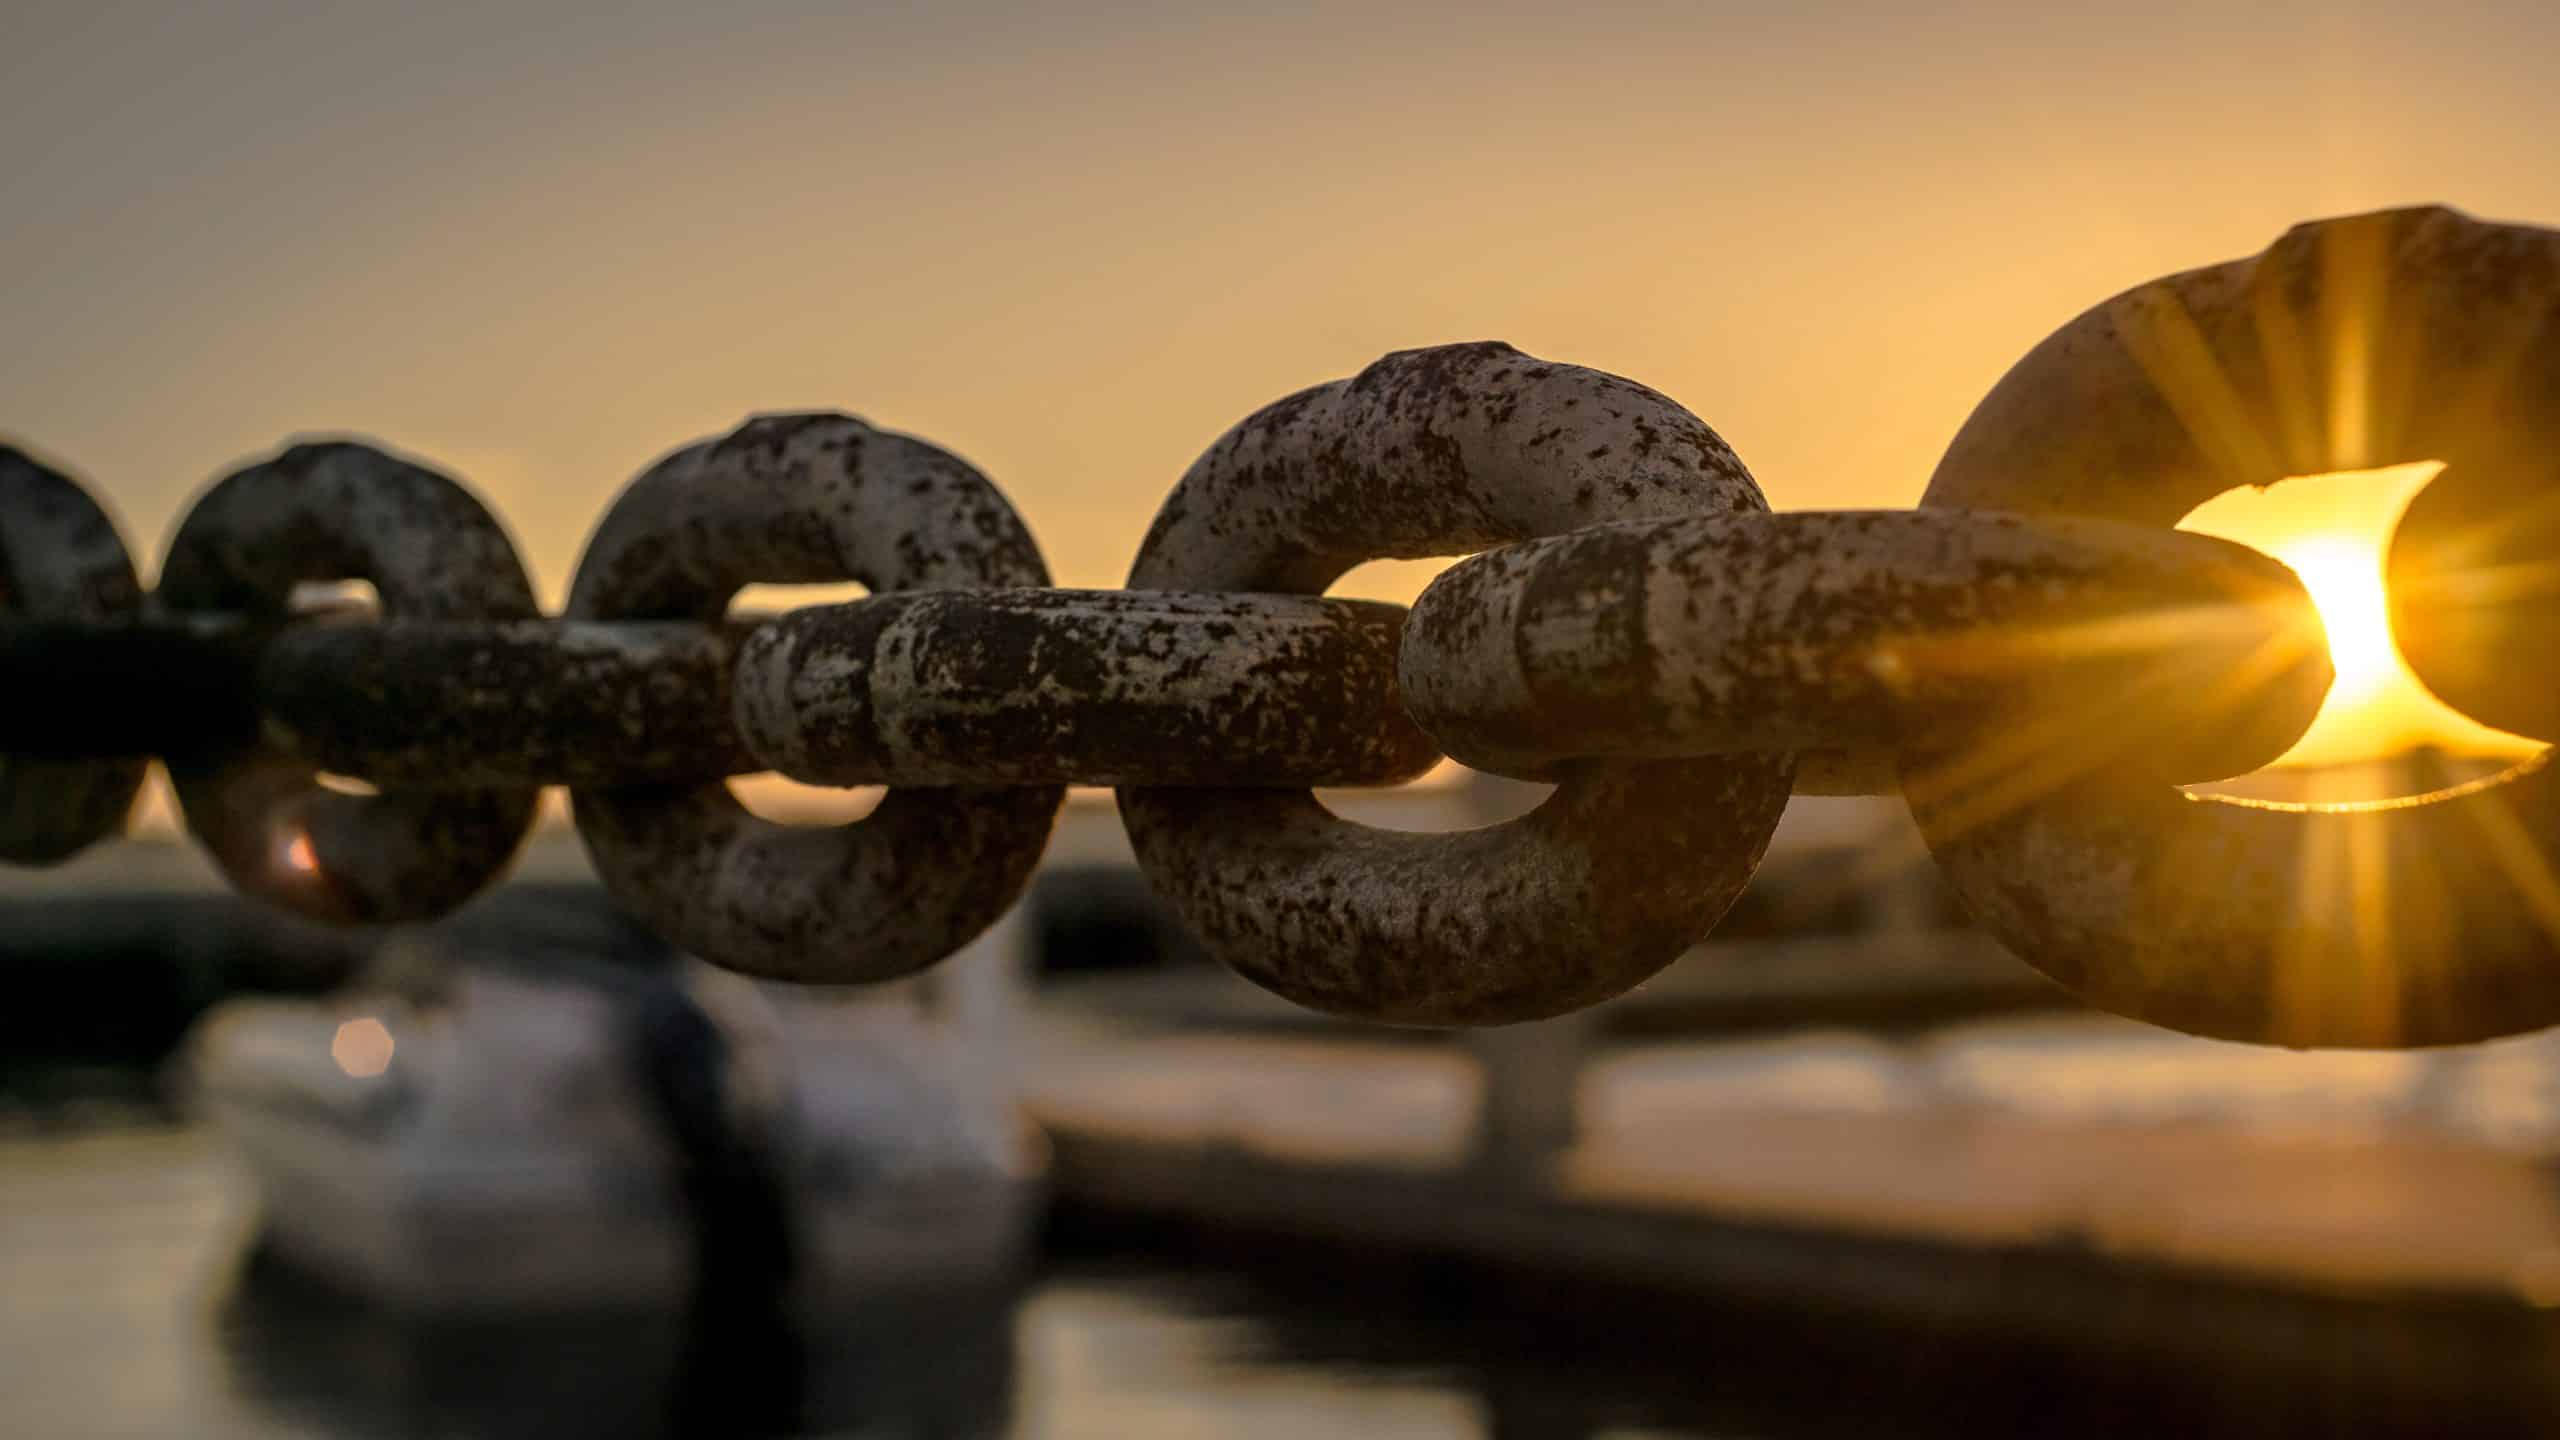 Empower Procurement For success. Photo by Photo by Joey Kyber: https://www.pexels.com/photo/selective-focus-photoraphy-of-chains-during-golden-hour-119562/